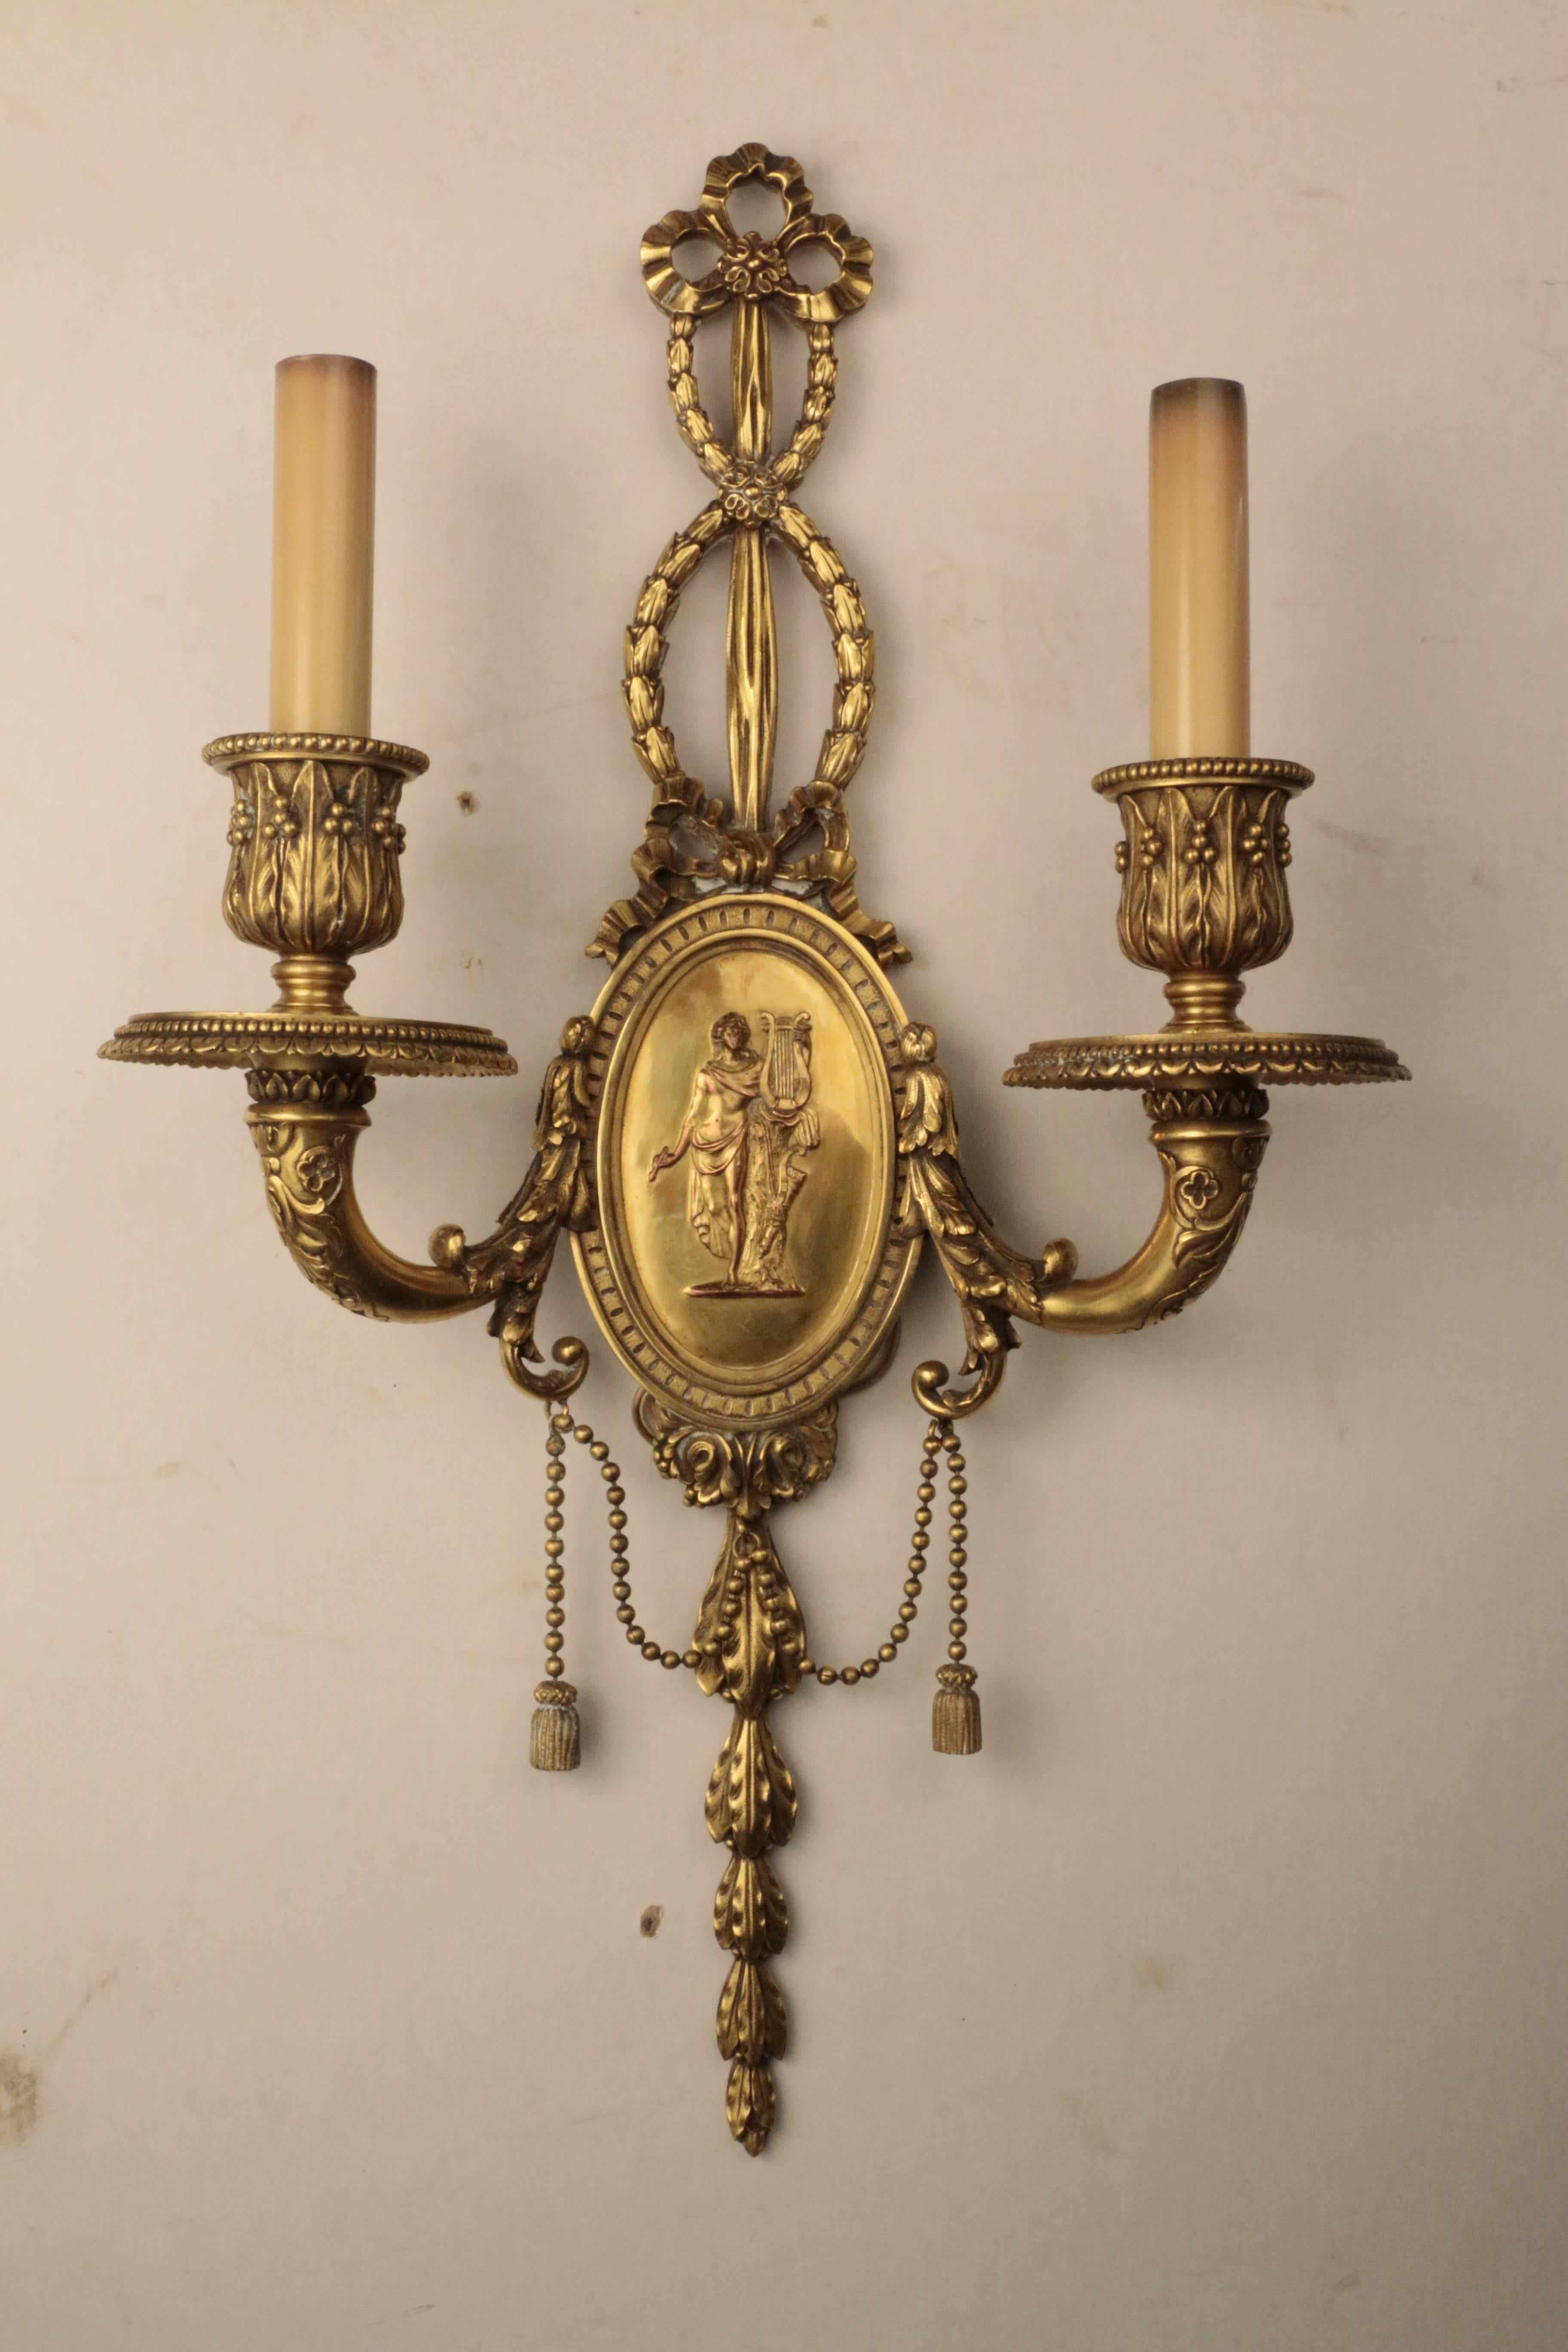 A fine pair of Louis XVI style gilt bronze two-light wall sconces by E F Caldwell of New York, each oval backplate modeled in low relief with an allegorical figure, the muse Calliope. The stem, candle cups and arms are cast with stylized acanthus,